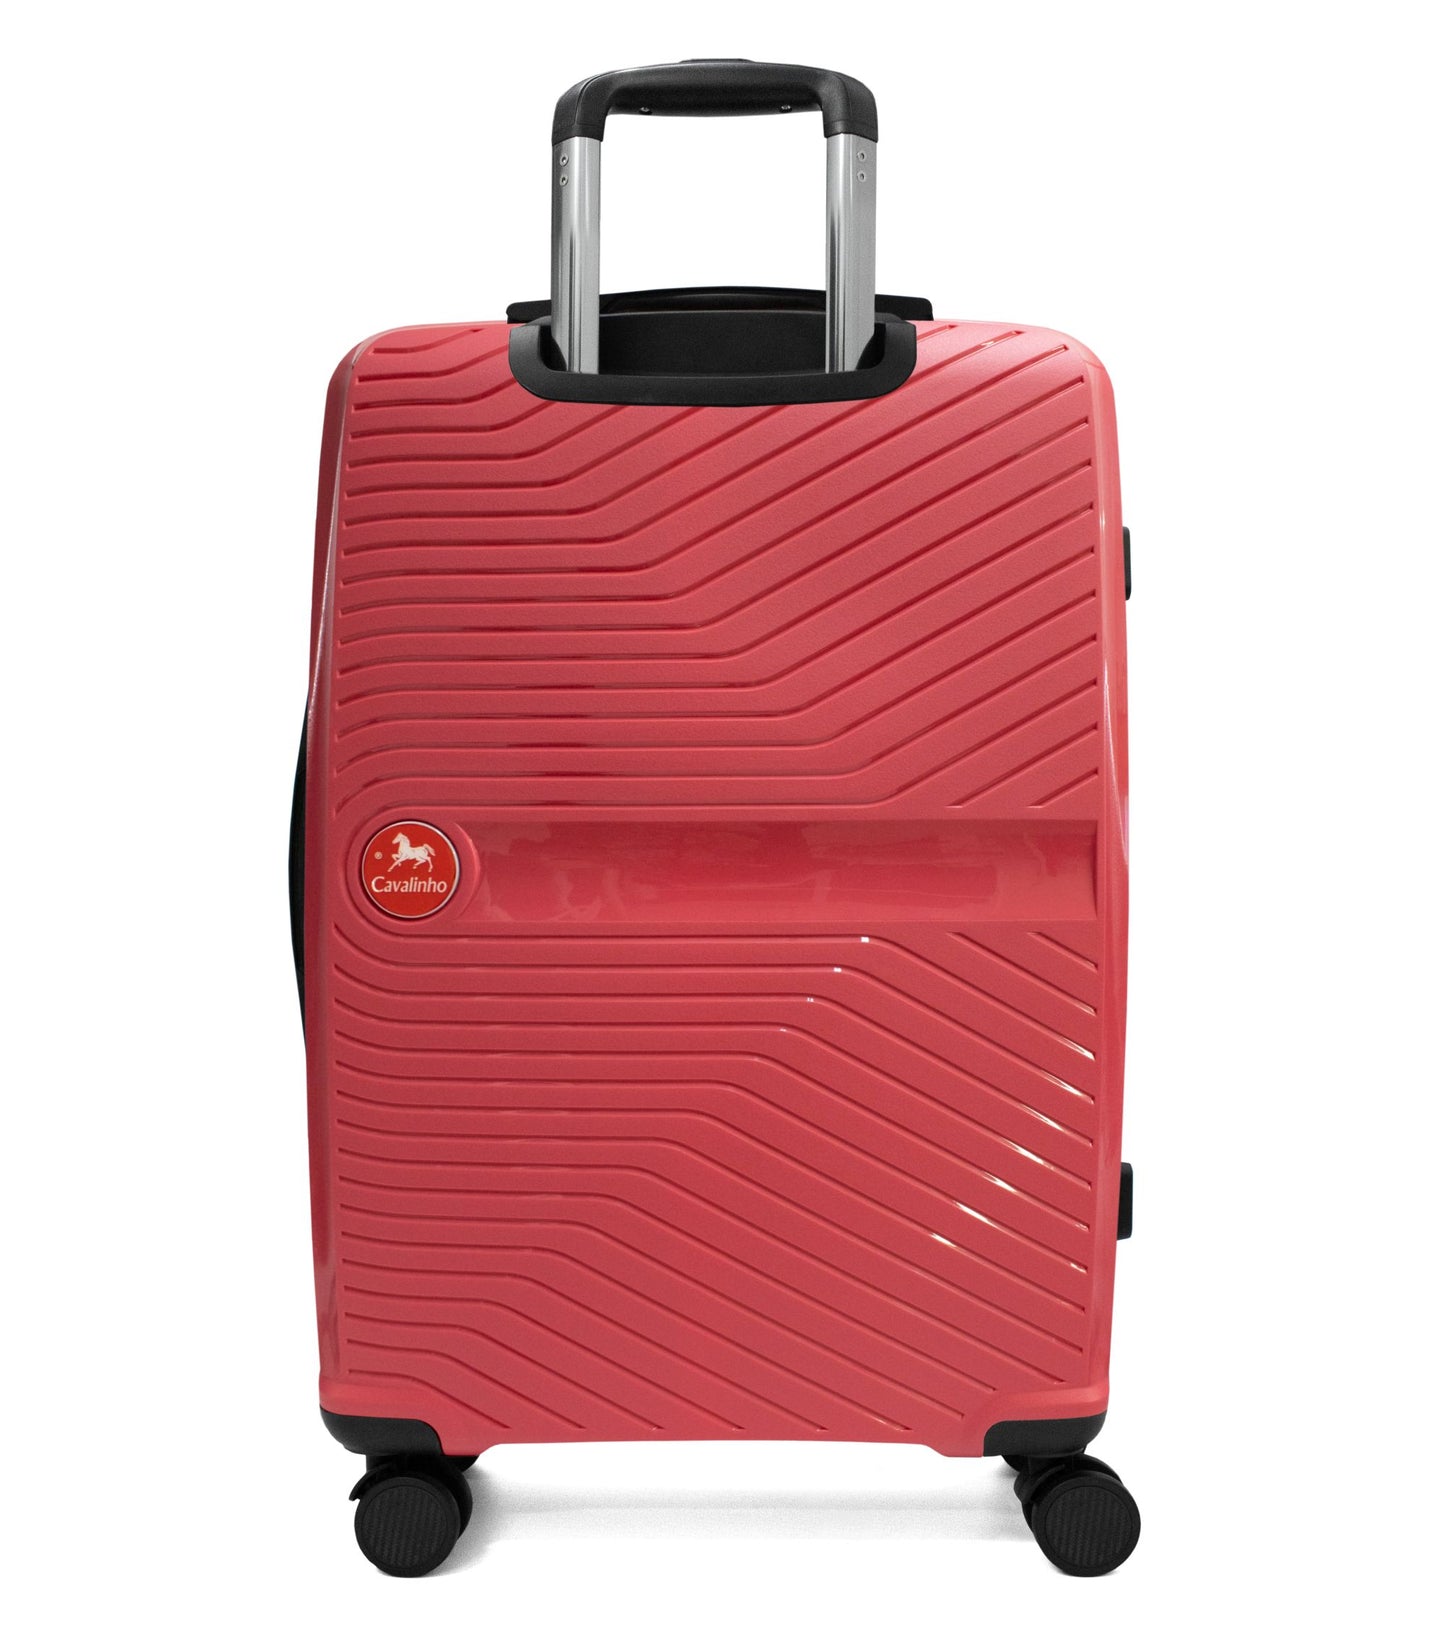 Cavalinho Colorful Check-in Hardside Luggage (24") - 24 inch Coral - 68020004.27.24_3